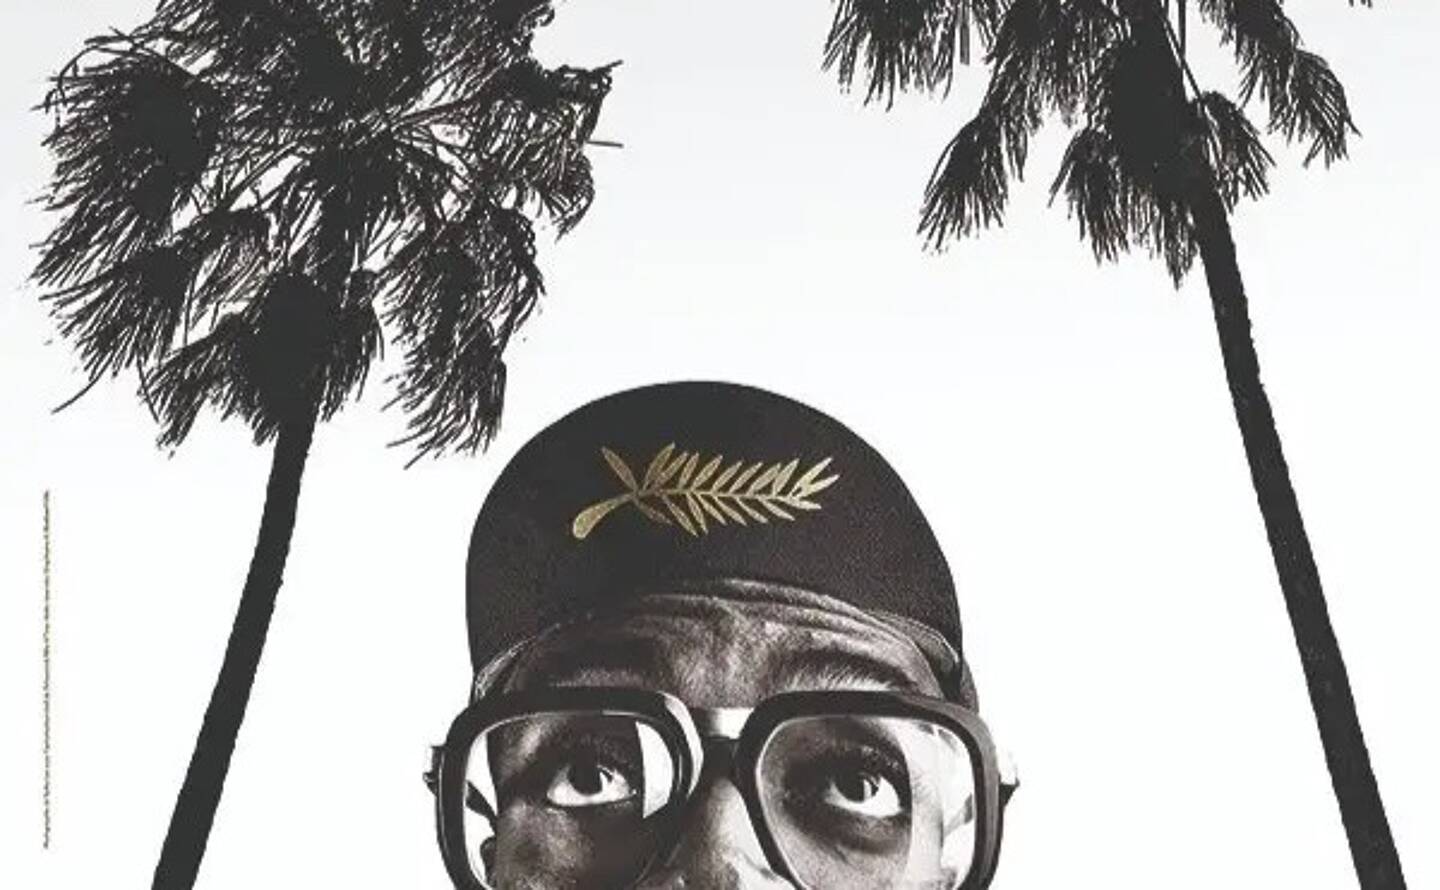 Cannes Filmfesztival 2021 Spike Lee